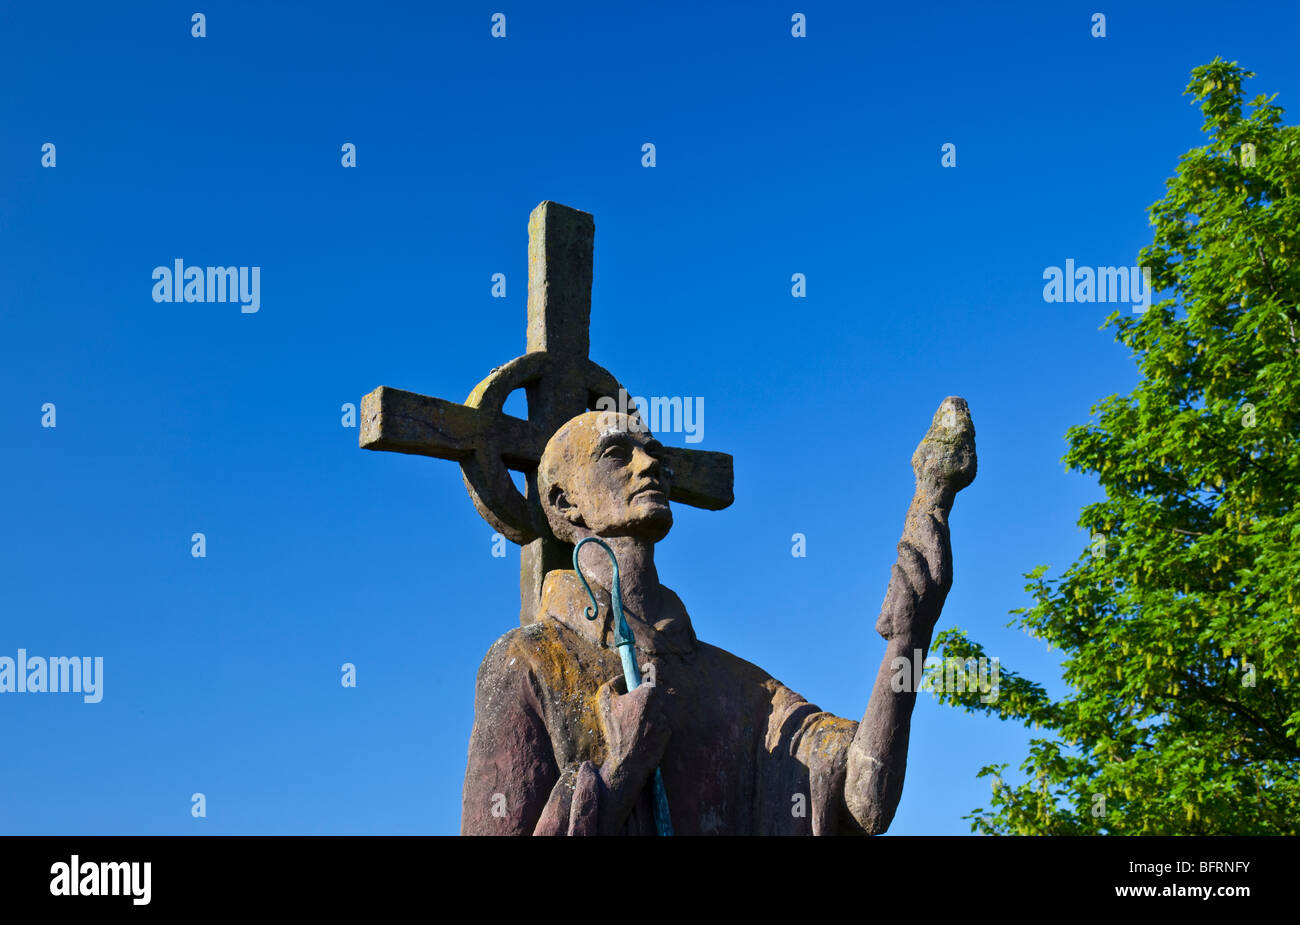 The iconic holy statue of St Aiden on a warm summers day with deep blue skies. Stock Photo